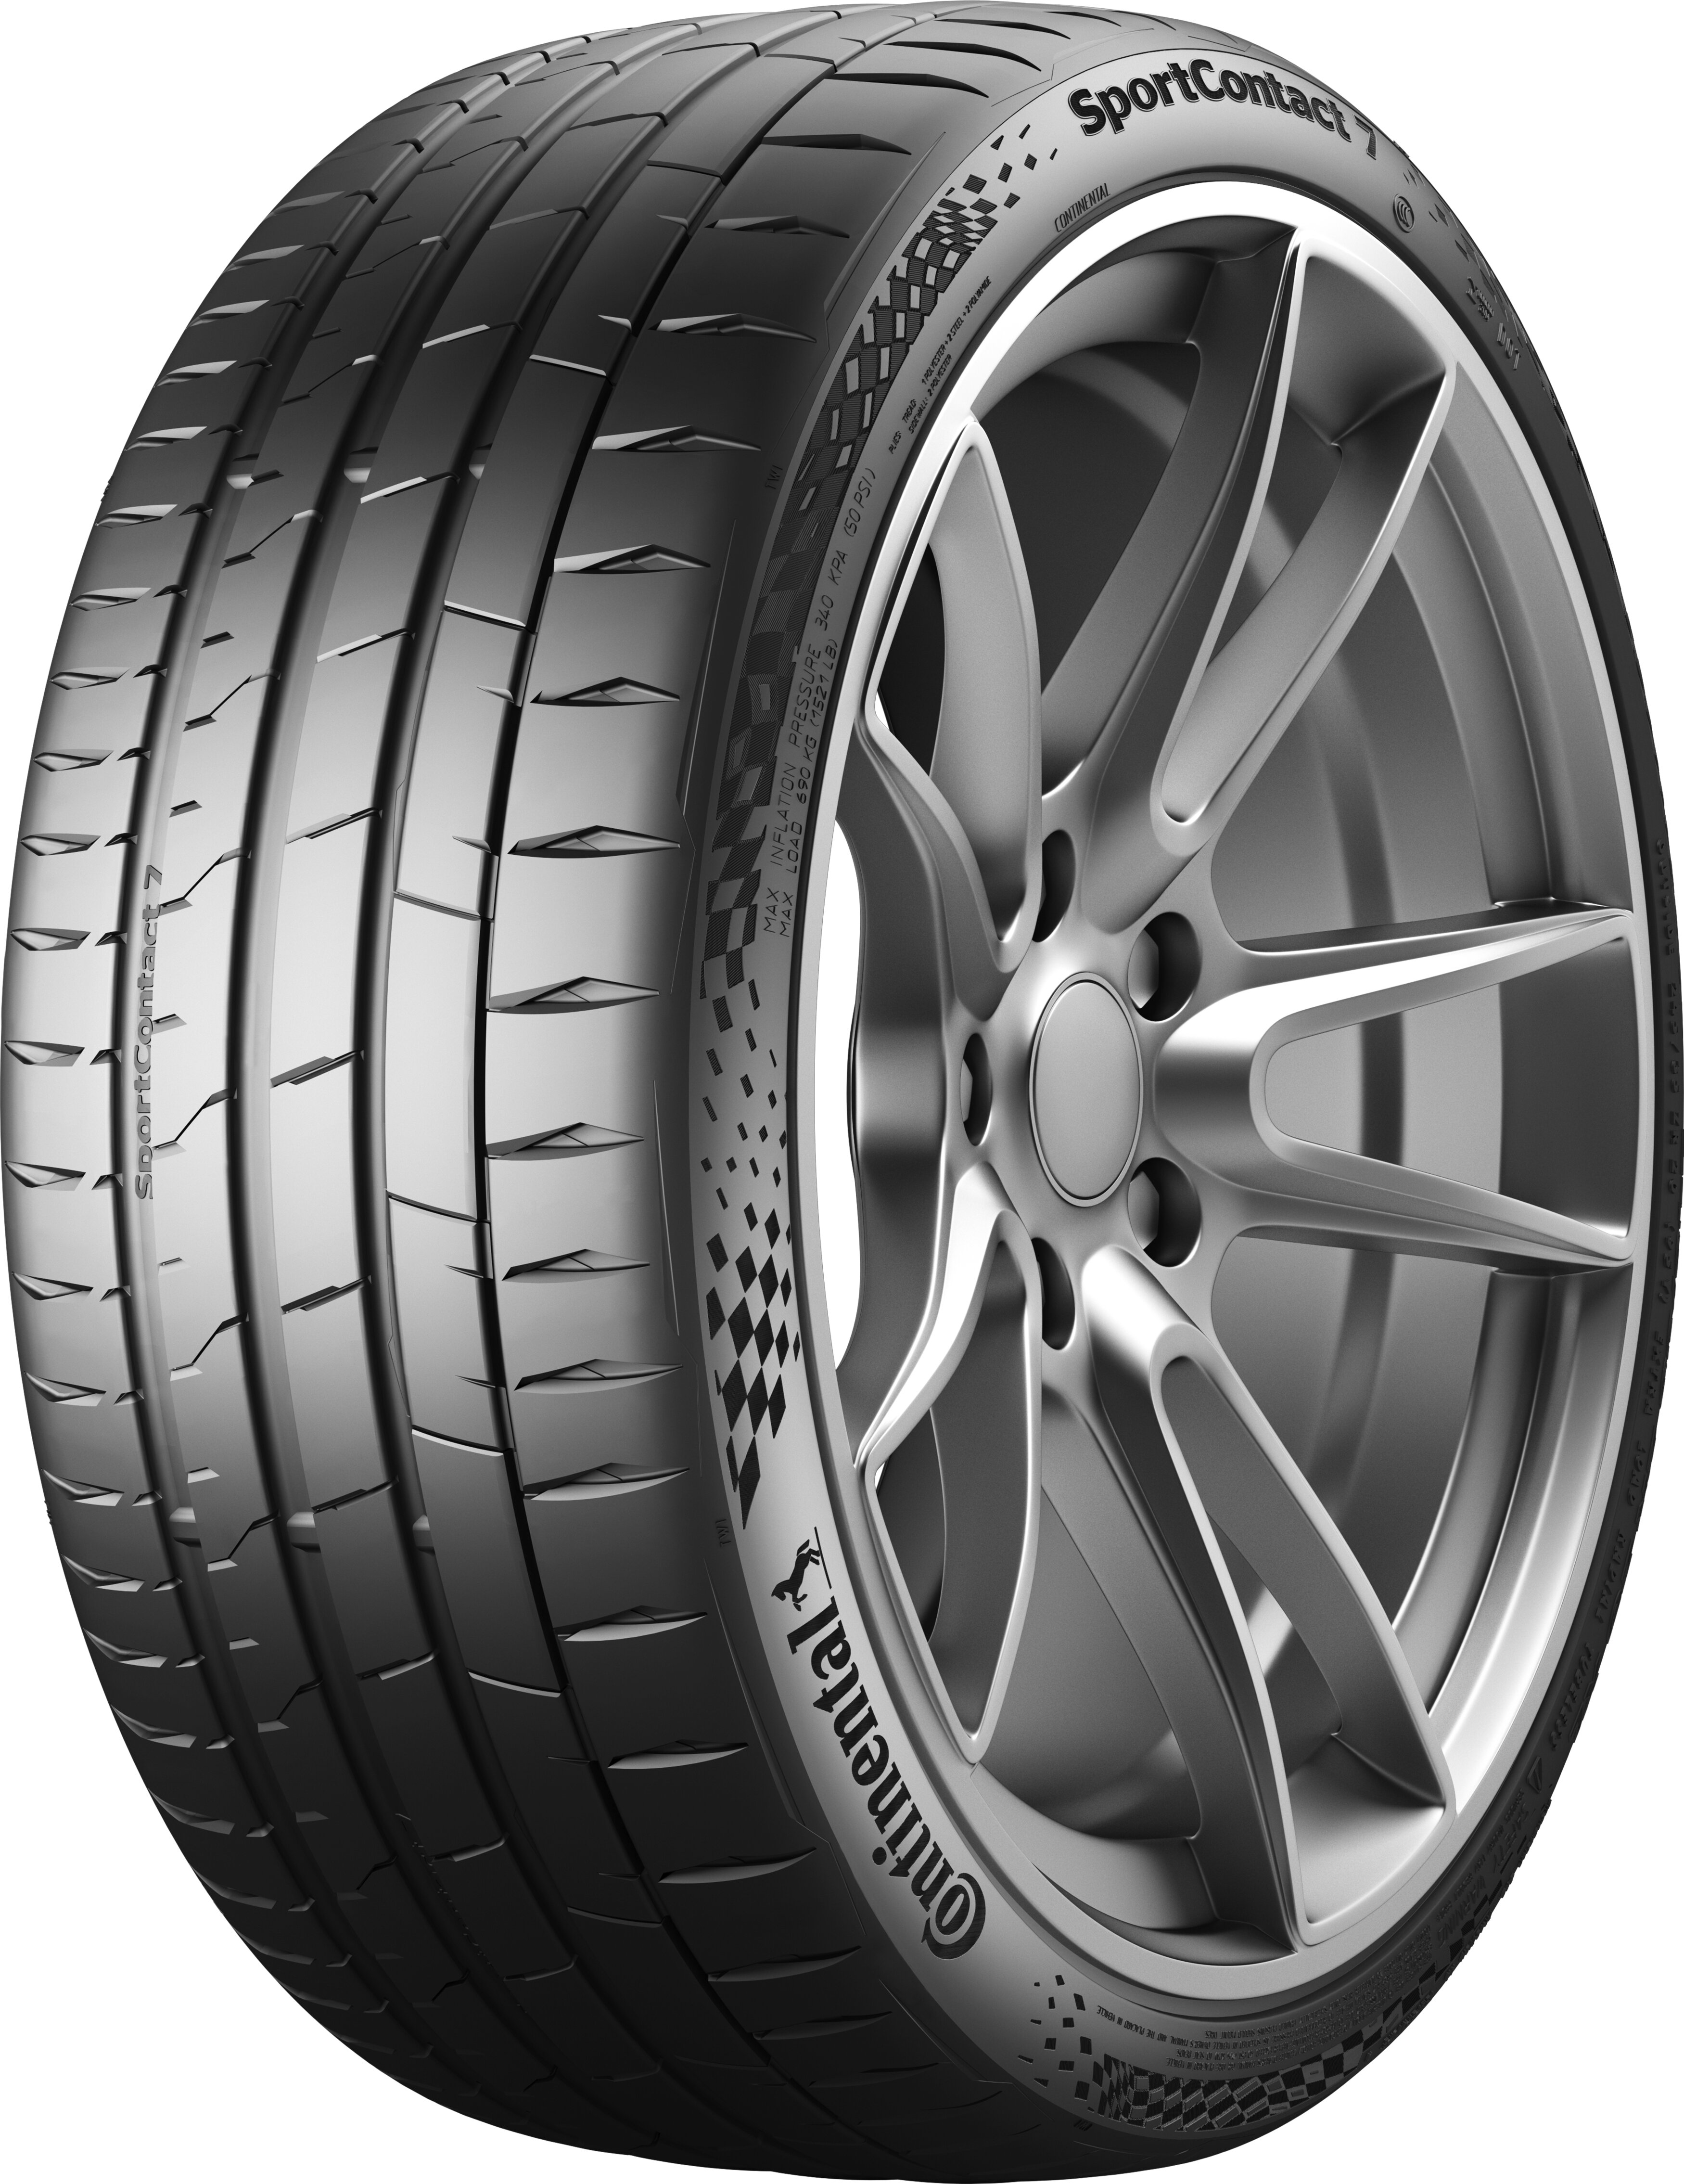 Anvelope Vara Continental Sportcontact 7 Silent 285/30R22 101Y